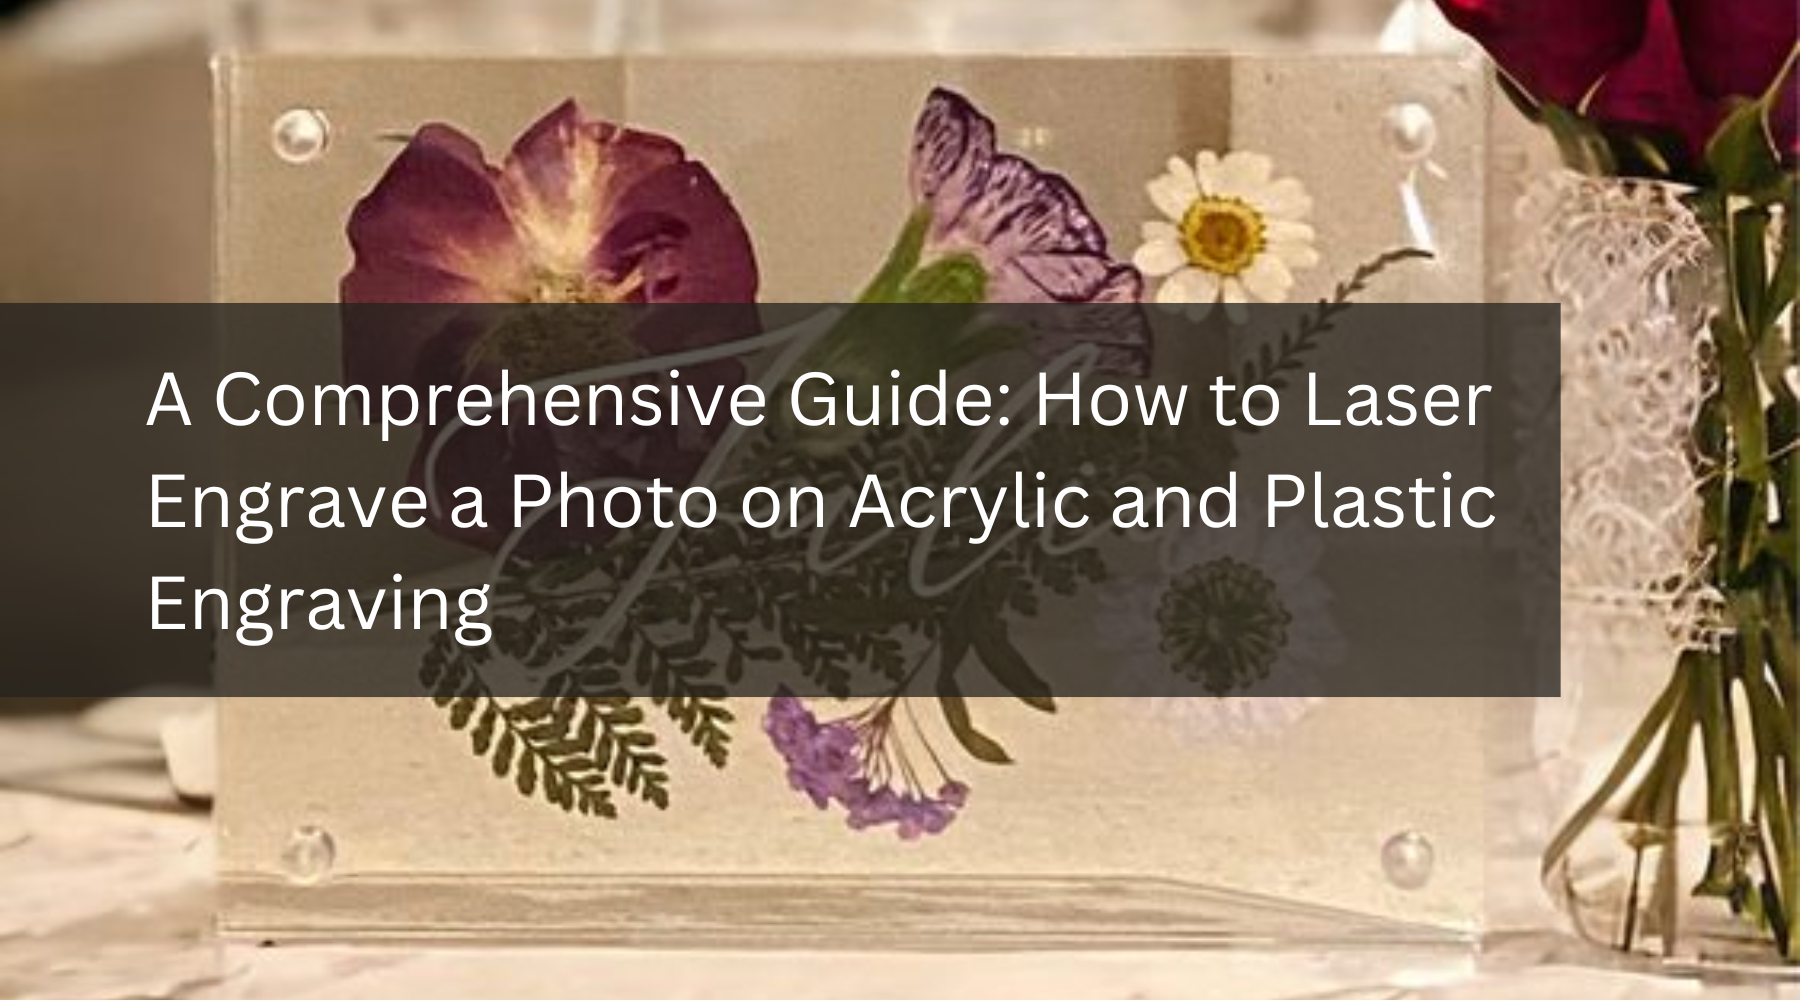 A Comprehensive Guide: How to Laser Engrave a Photo on Acrylic and Plastic Engraving